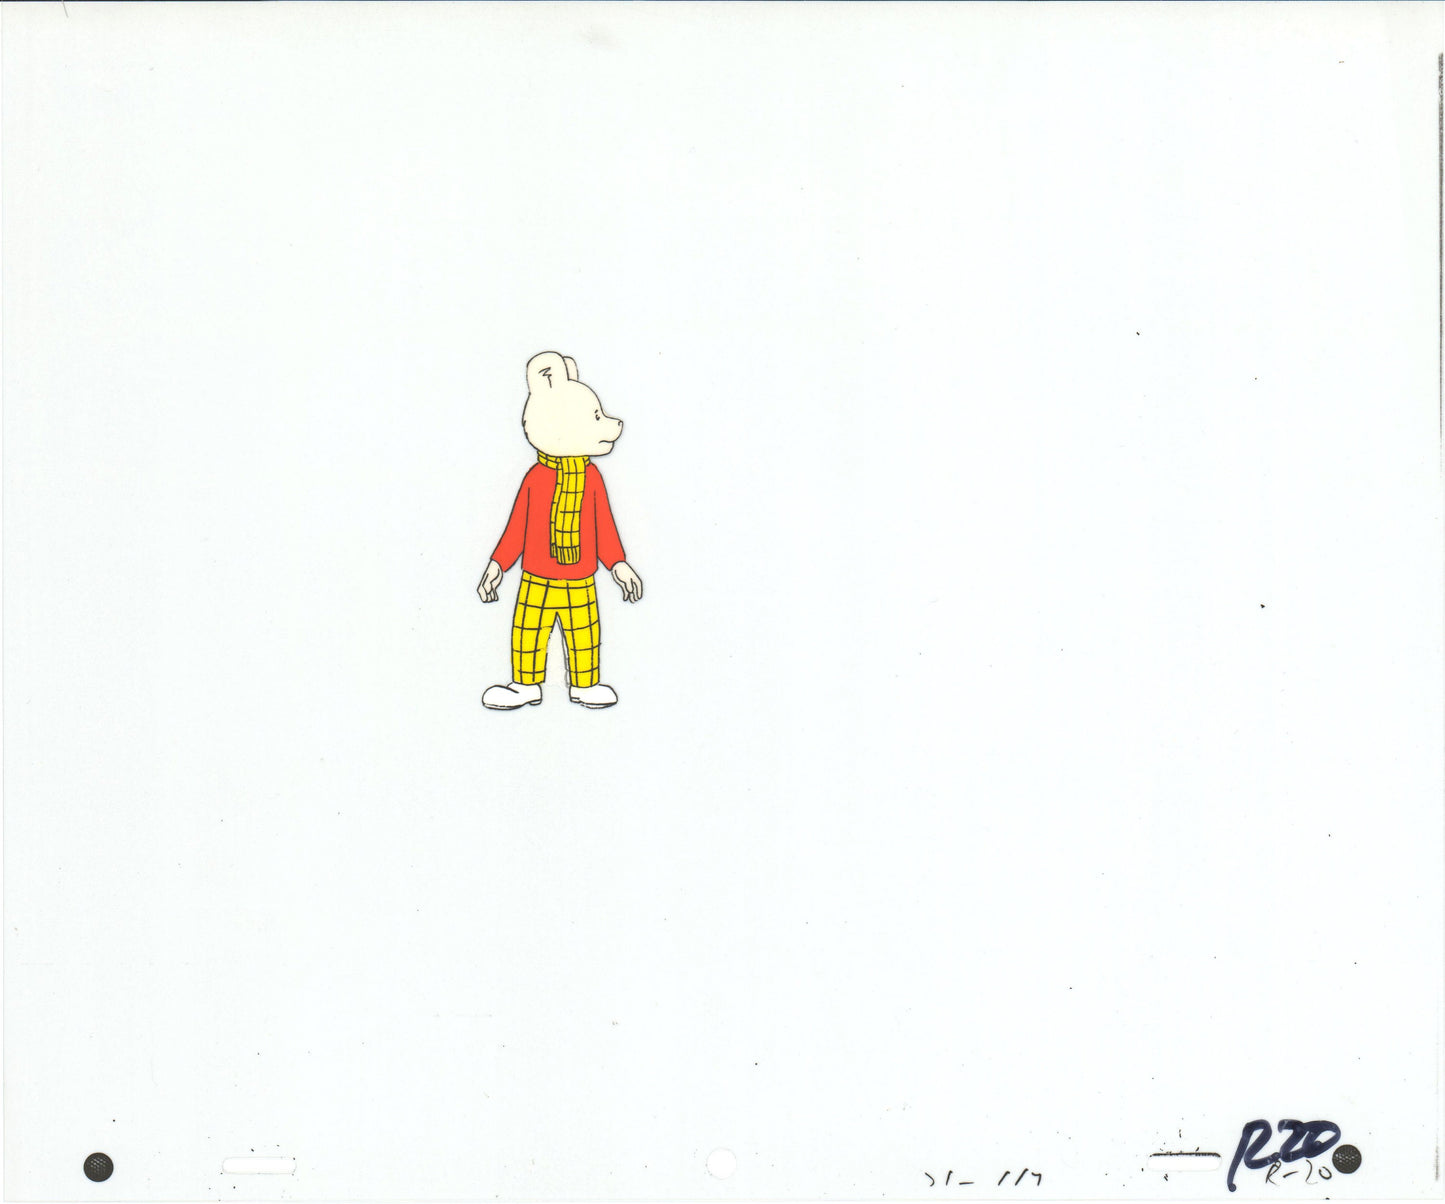 RUPERT Bear Original Production Animation Cel and Drawing from the Cartoon by Nelvana Tourtel Animation 1990s B70294